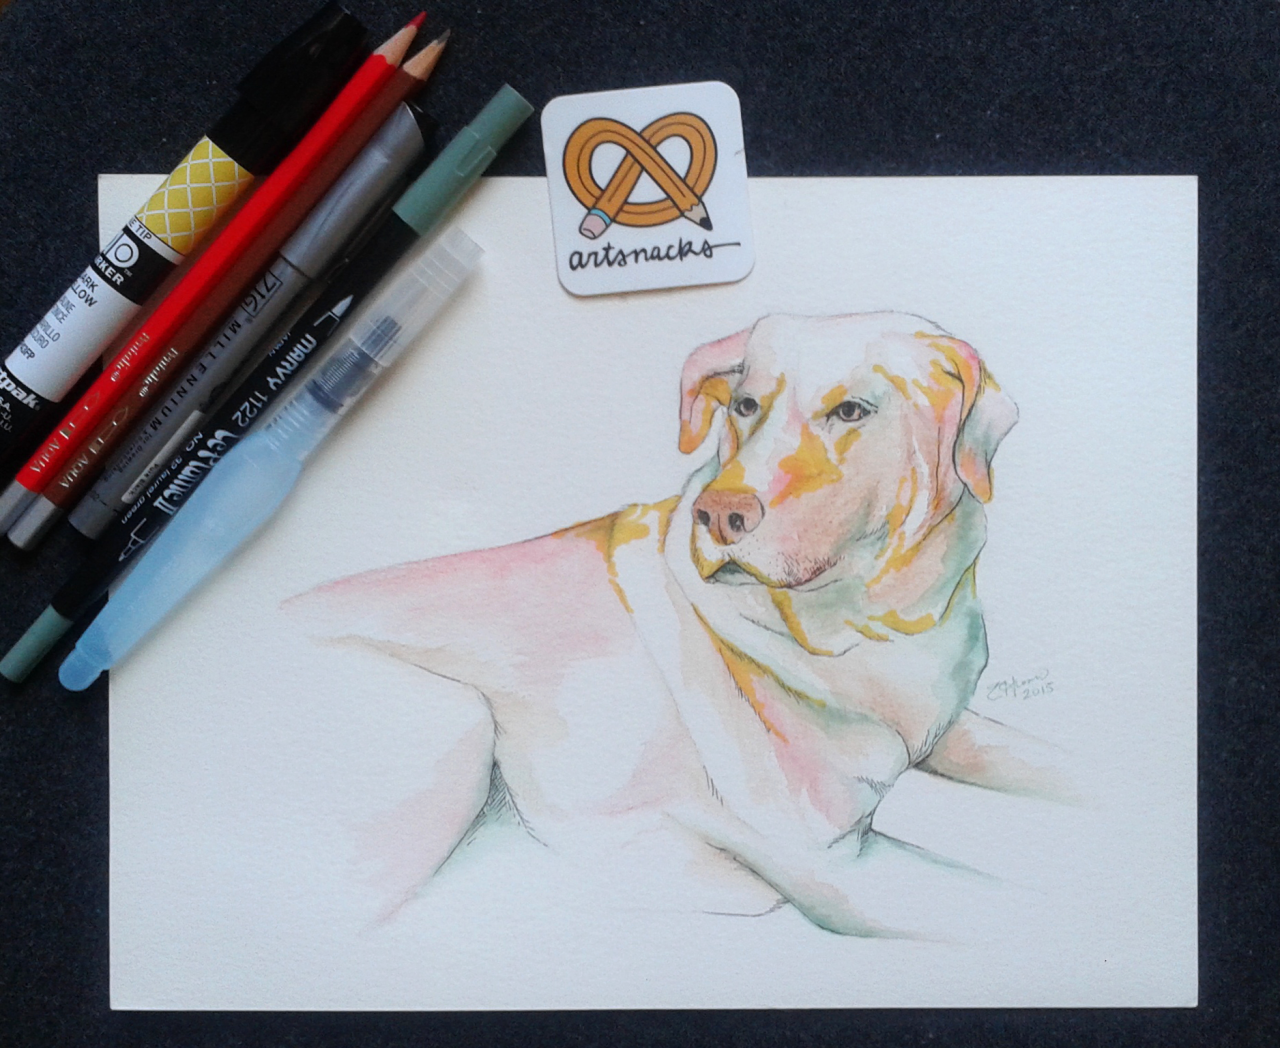 emilyhromi: “April’s ArtSnacks! I really liked this box, especially the water pen. I had no idea water pens even existed! Doggie. artsnacksblog ” ArtSnacks is like a magazine subscription but instead of a magazine you get 4 or 5 different art...